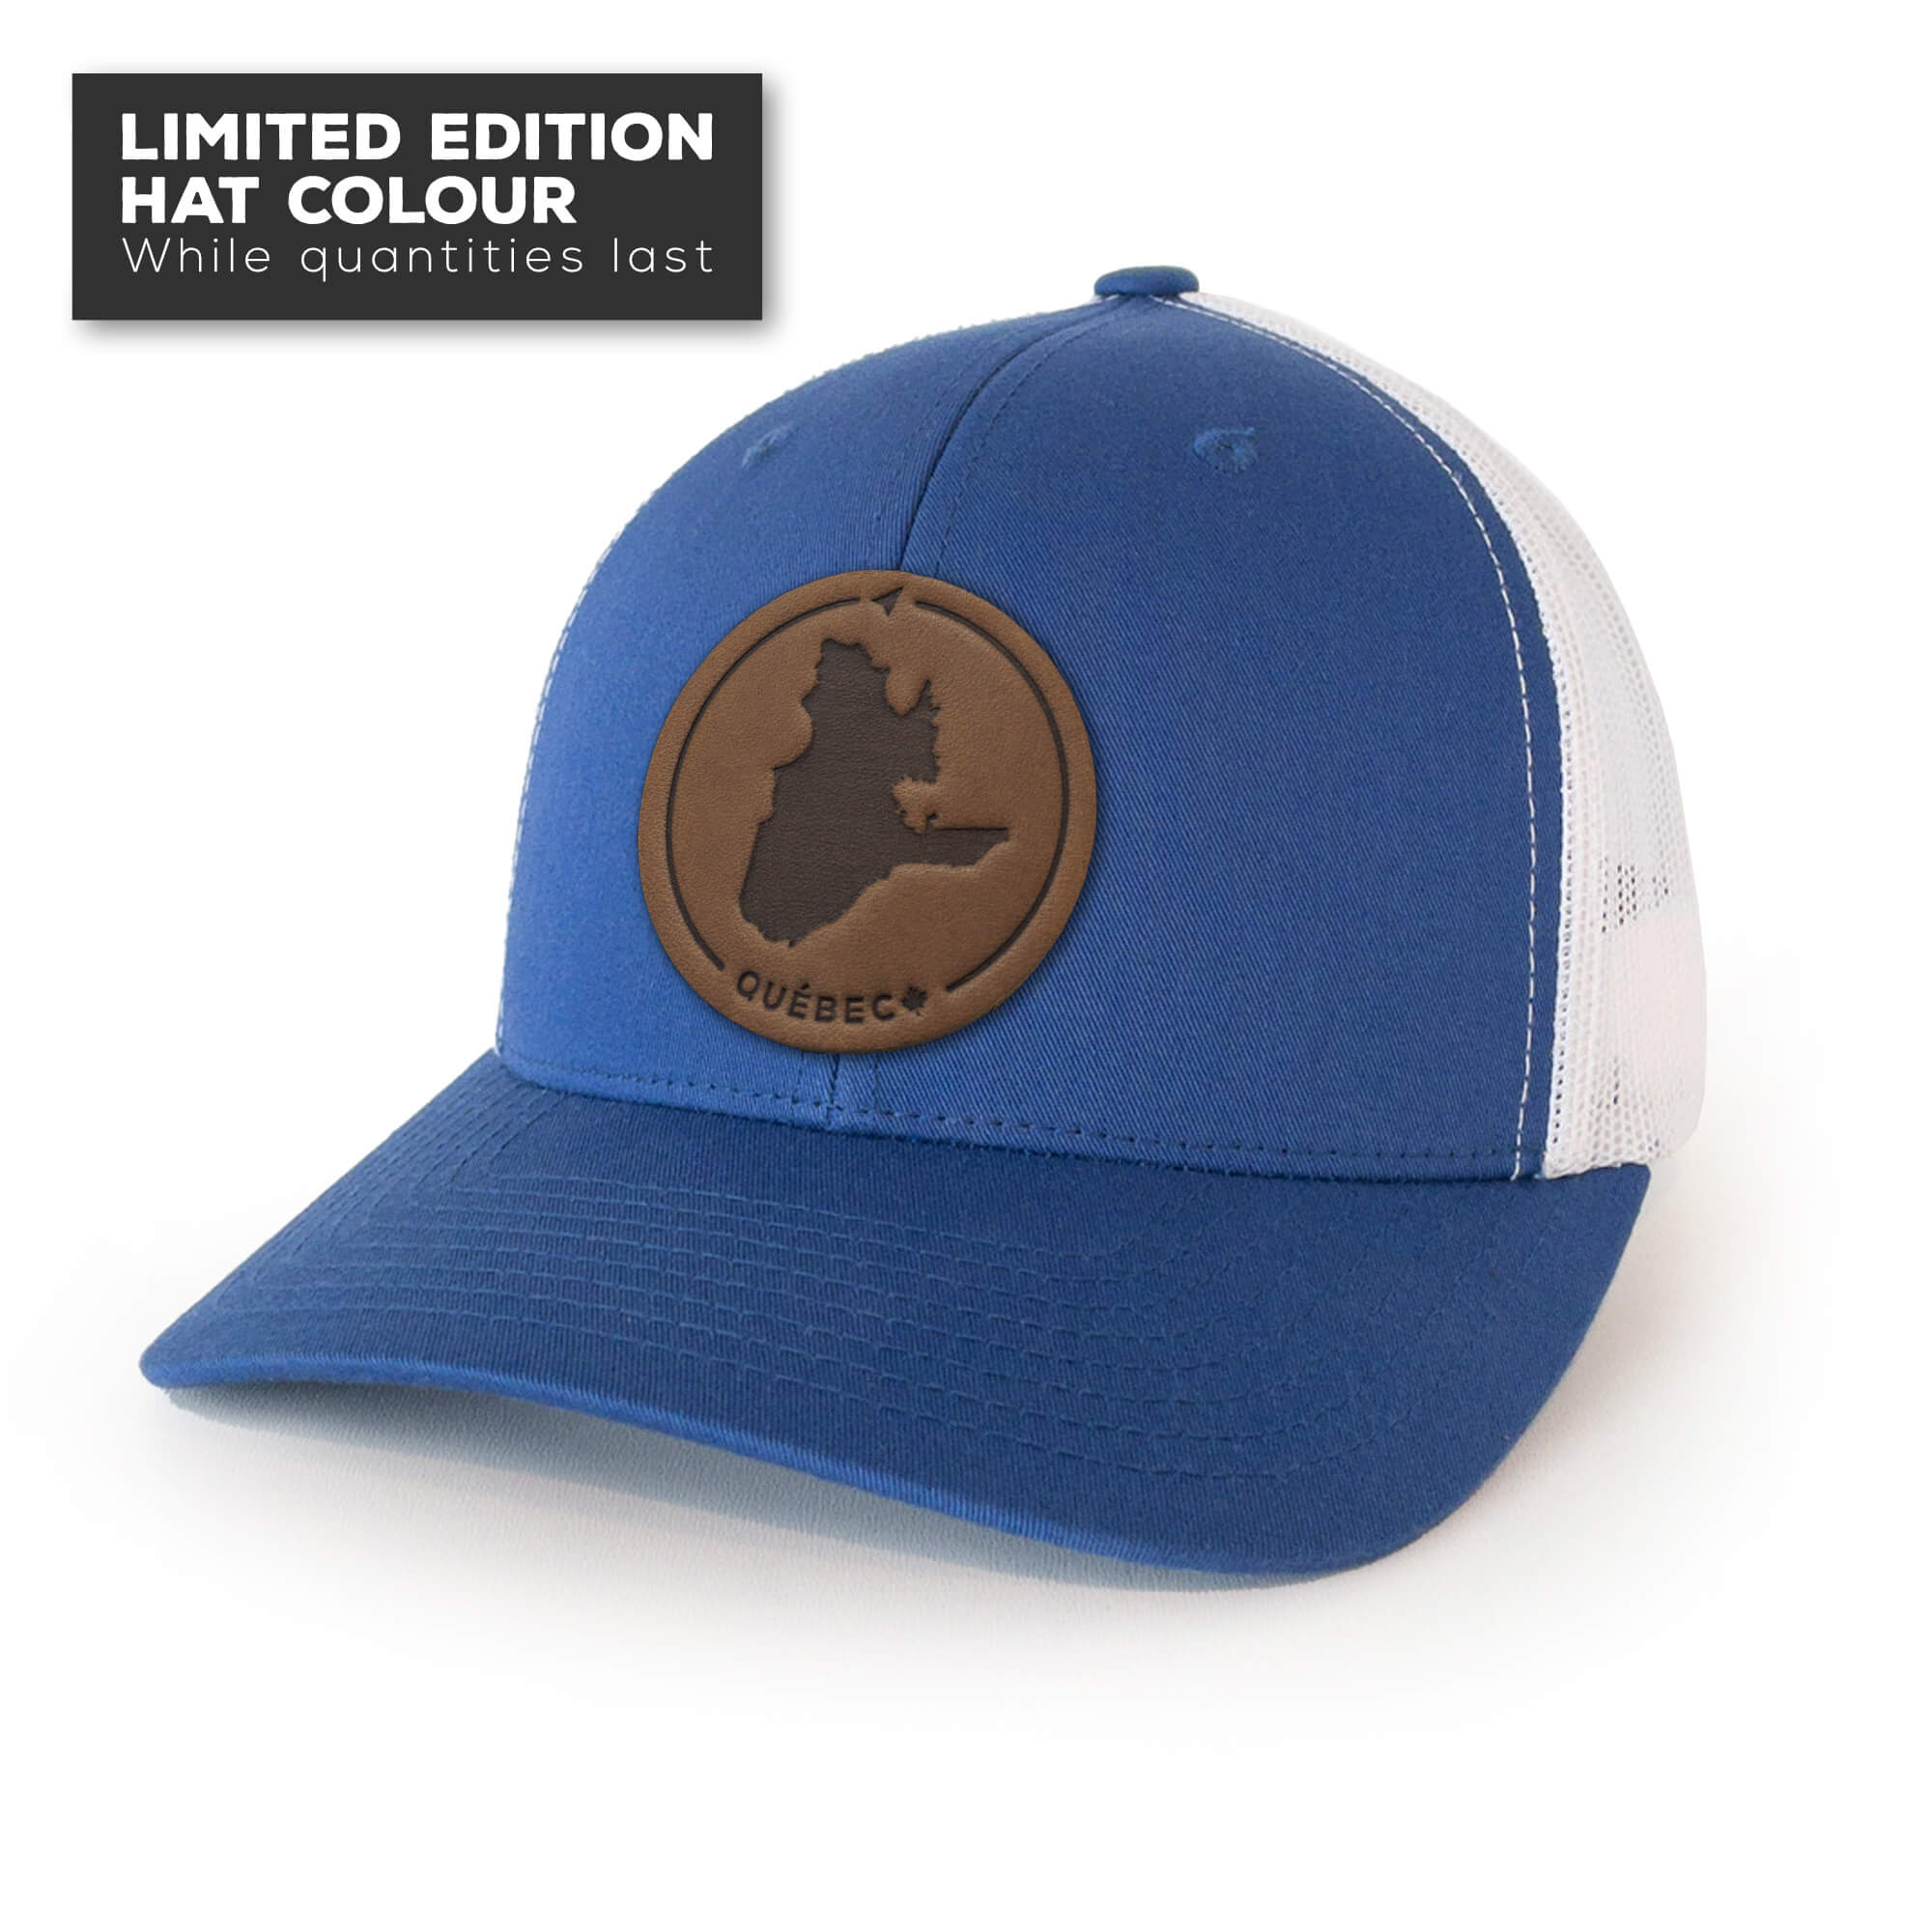 Royal Blue trucker hat with full-grain leather patch of Québec